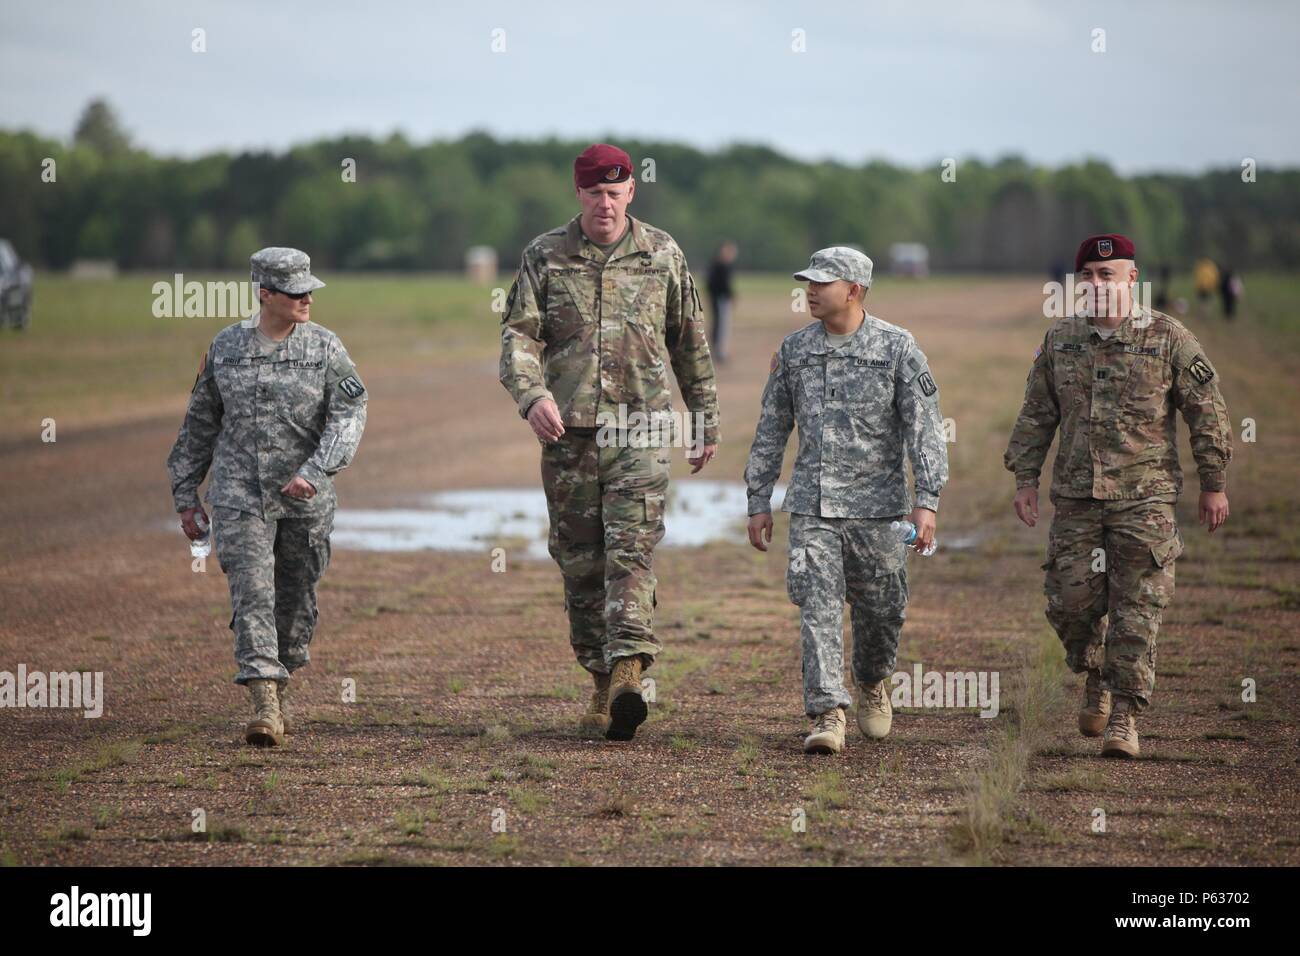 (from left to right) U.S. Army Brig. Gen. Janice Haigler, deputy commander of the 335th Signal Command (Theater), Maj. Christopher Murphy, commander of the 982nd Combat Camera Company (Airborne), 1st Lt. Daniel Lwe assigned to the 335th Theater Signal Command and Capt. Loren Teillon, assigned to the 982nd Combat Camera Combat Company (Airborne), walk to watch another event at the Best Ranger Competition  on Fort Mitchell, Ala., April 16, 2016. The 33rd annual Best Ranger Competition 2016 is a three-day event consisting of challenges to test competitor's physical, mental, and technical capabili Stock Photo